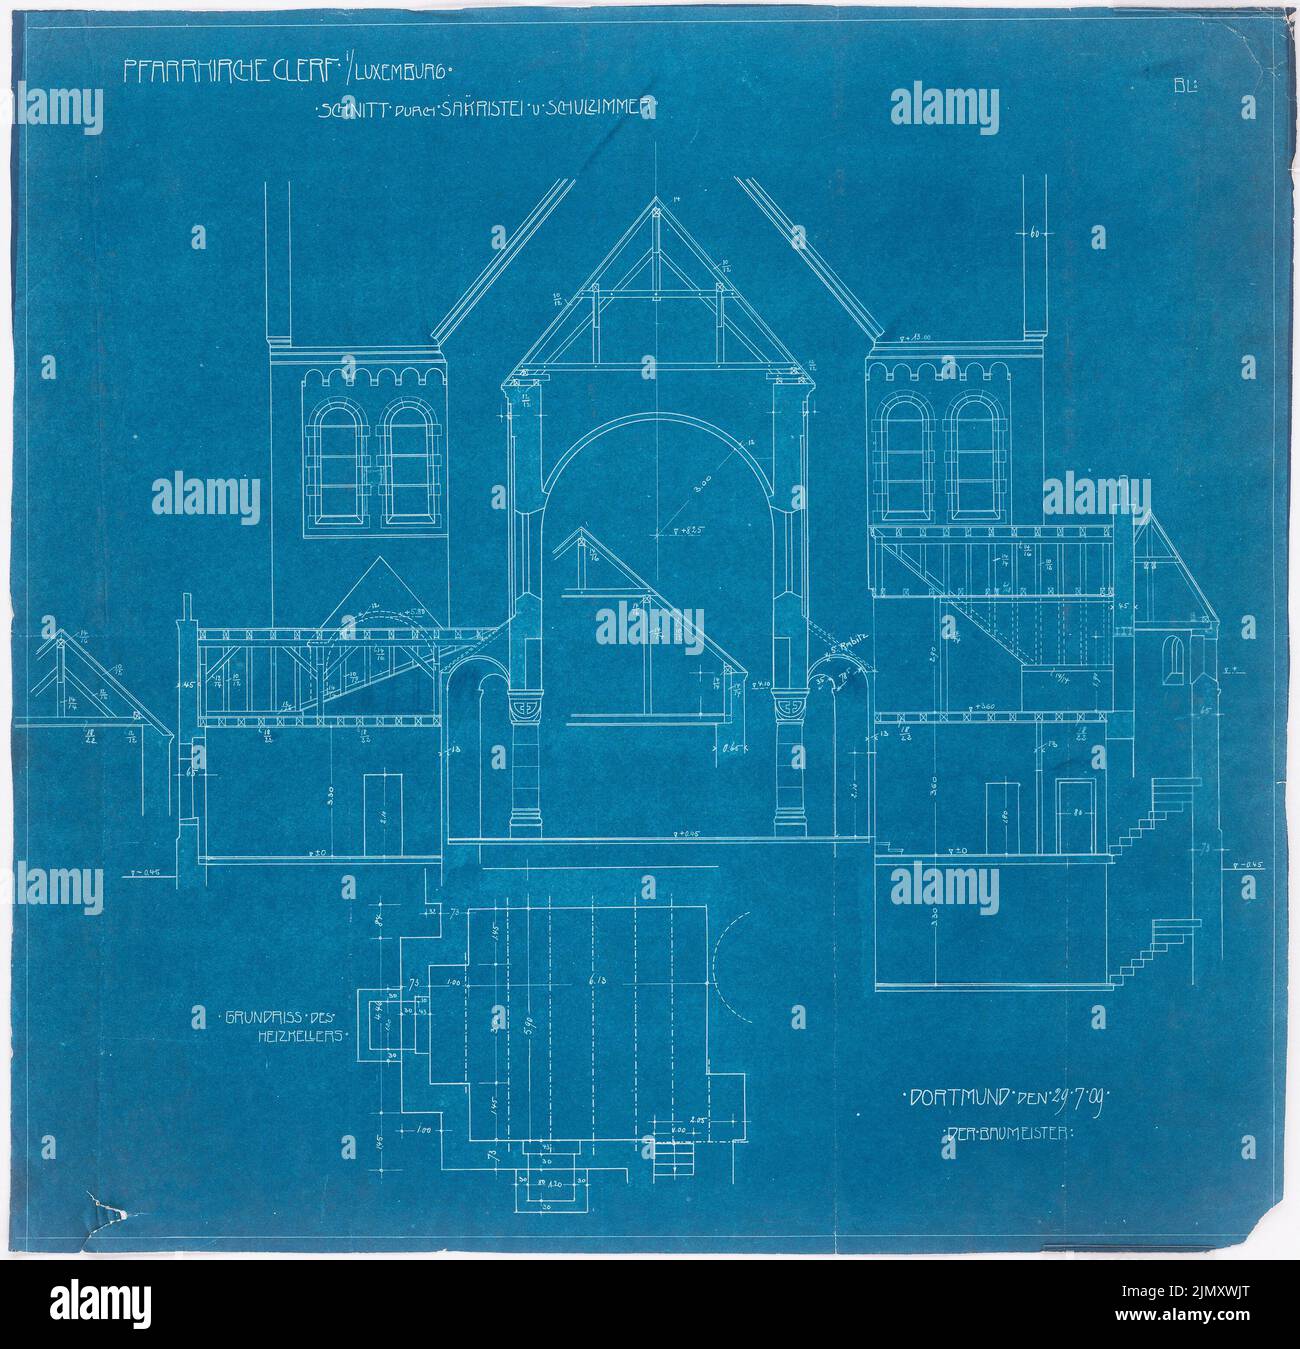 Klomp Johannes Franziskus (1865-1946), Dean's Church, Clerf (Cllervaux), Luxembourg (29.07.1909): Cut through sacristy and school room, floor plan of the heating cellar (1:50). Blueprint on paper, 63.4 x 65.5 cm (including scan edges) Stock Photo